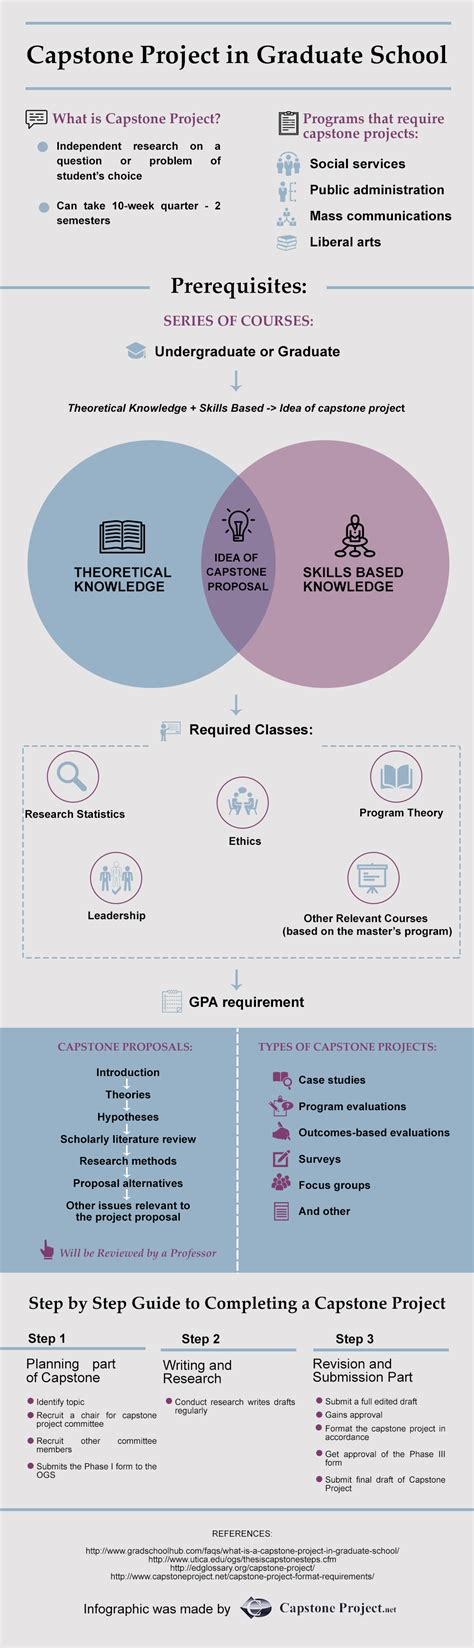 Will the capstone program be indicated on my degree? Capstone Project in Graduate School Infographics